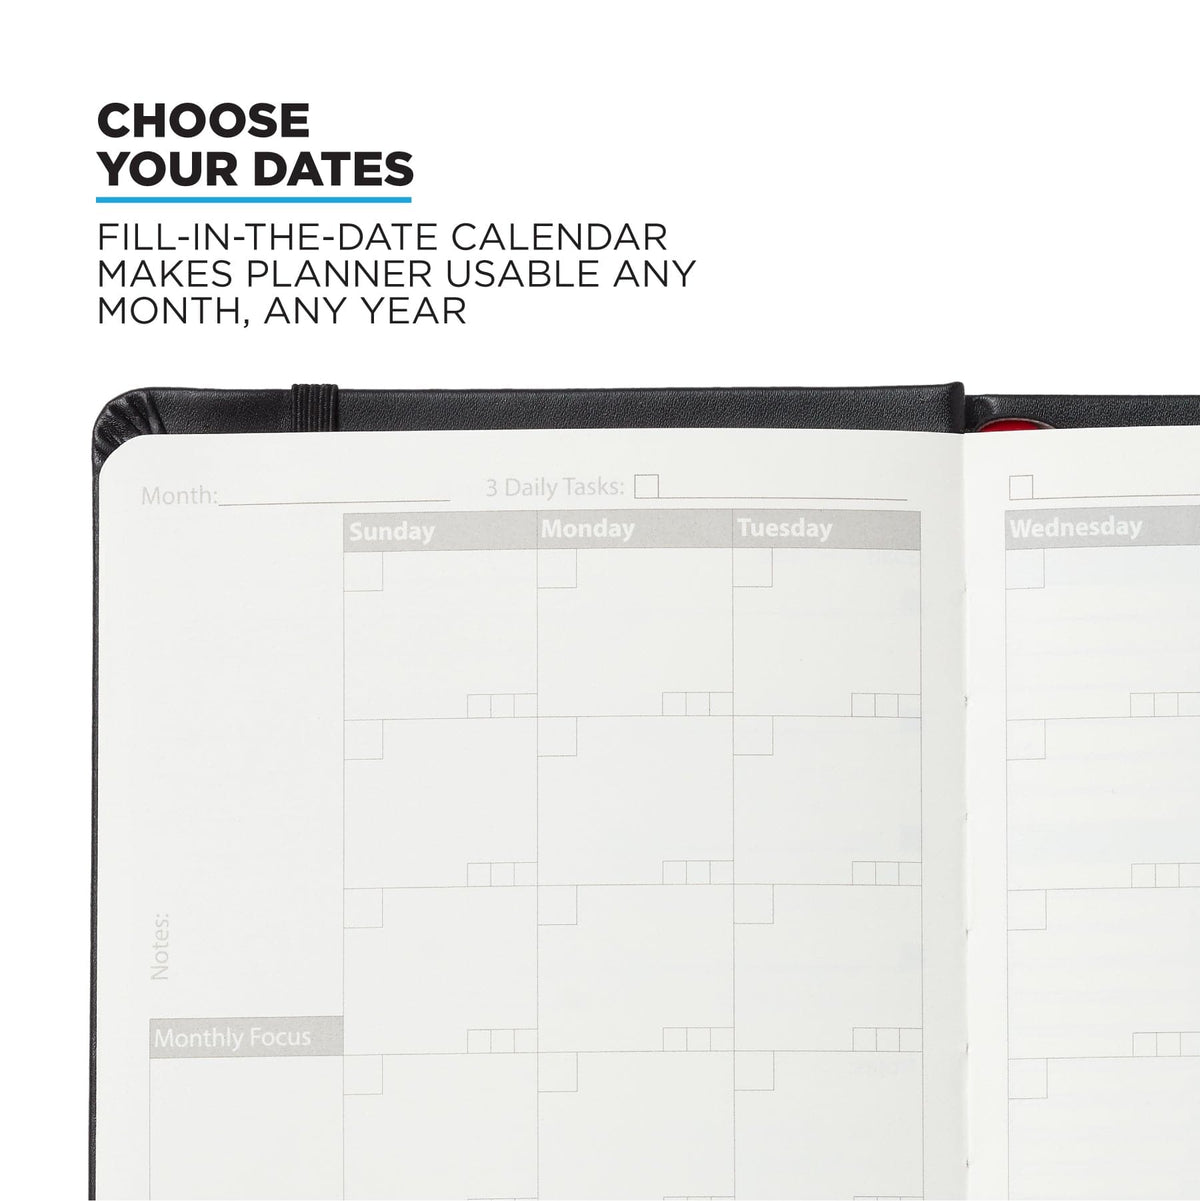 Nomatic Planner Notebook